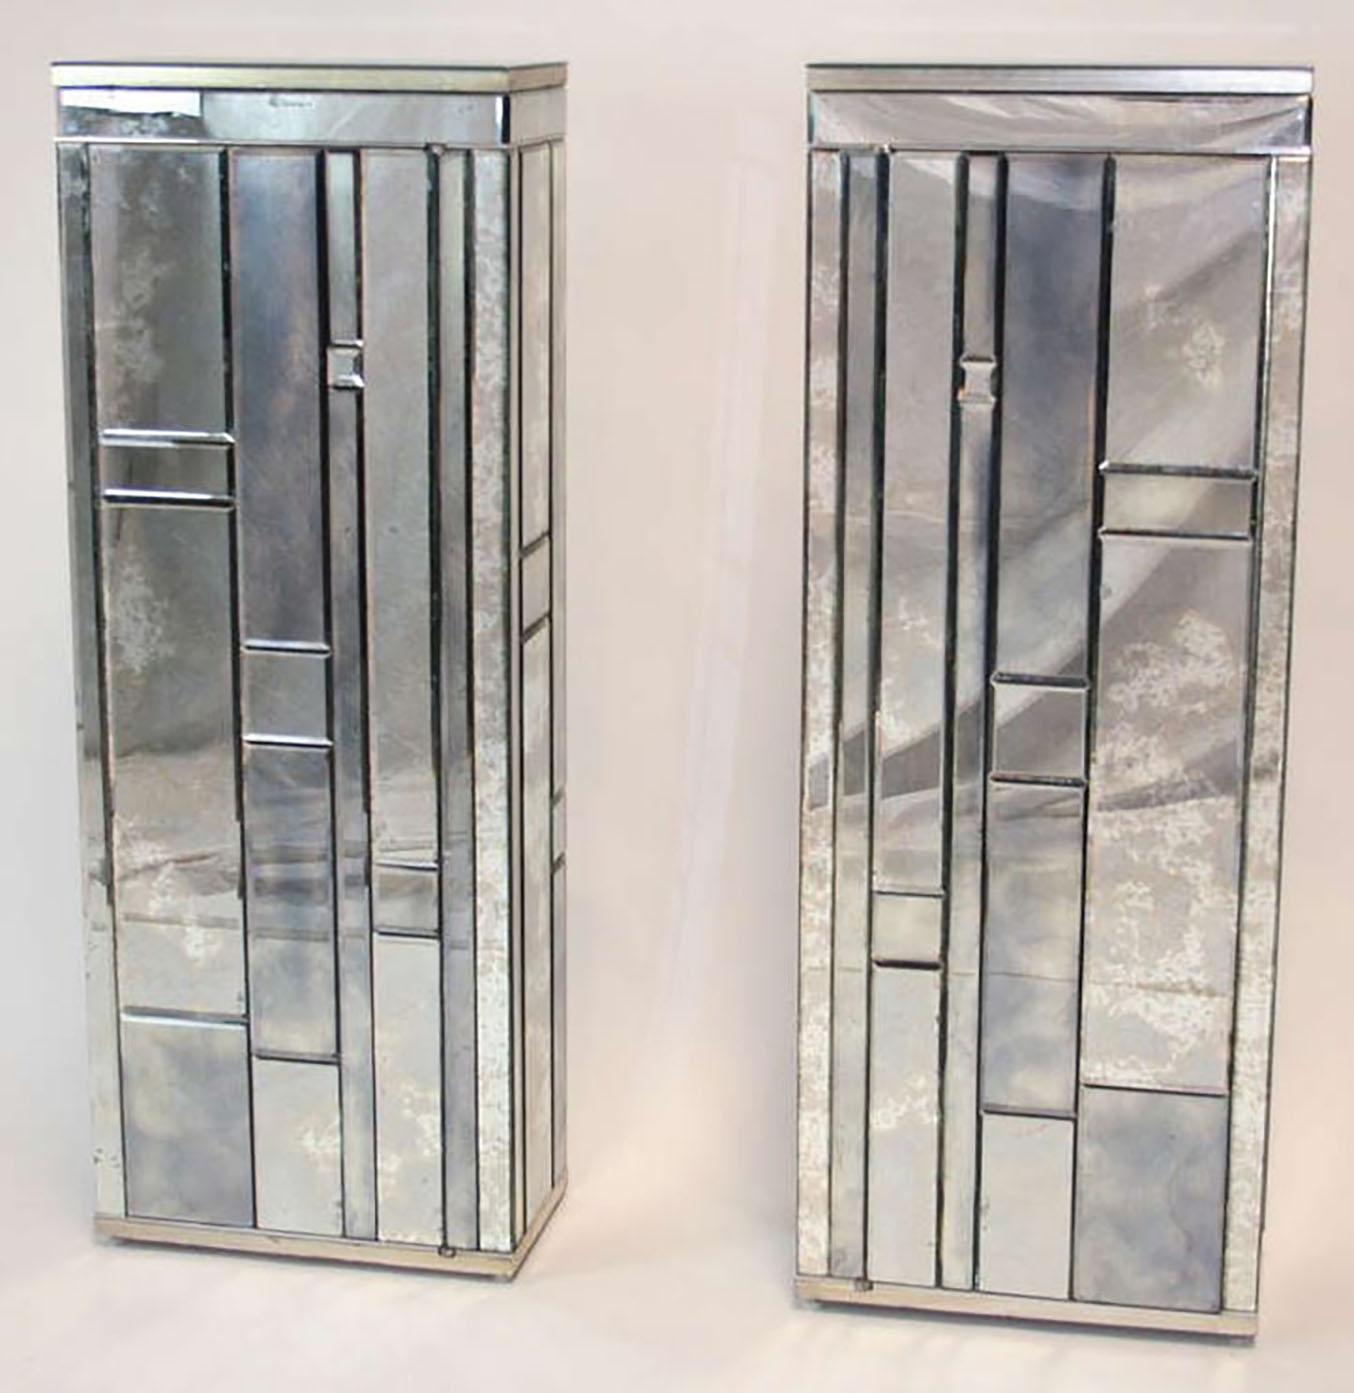 Exceptional pair of mirrored single door cabinets. Beveled, antiqued mirror covers piece, with silver leaf wood trim. By William Lyons Design Craft of NYC, 1975